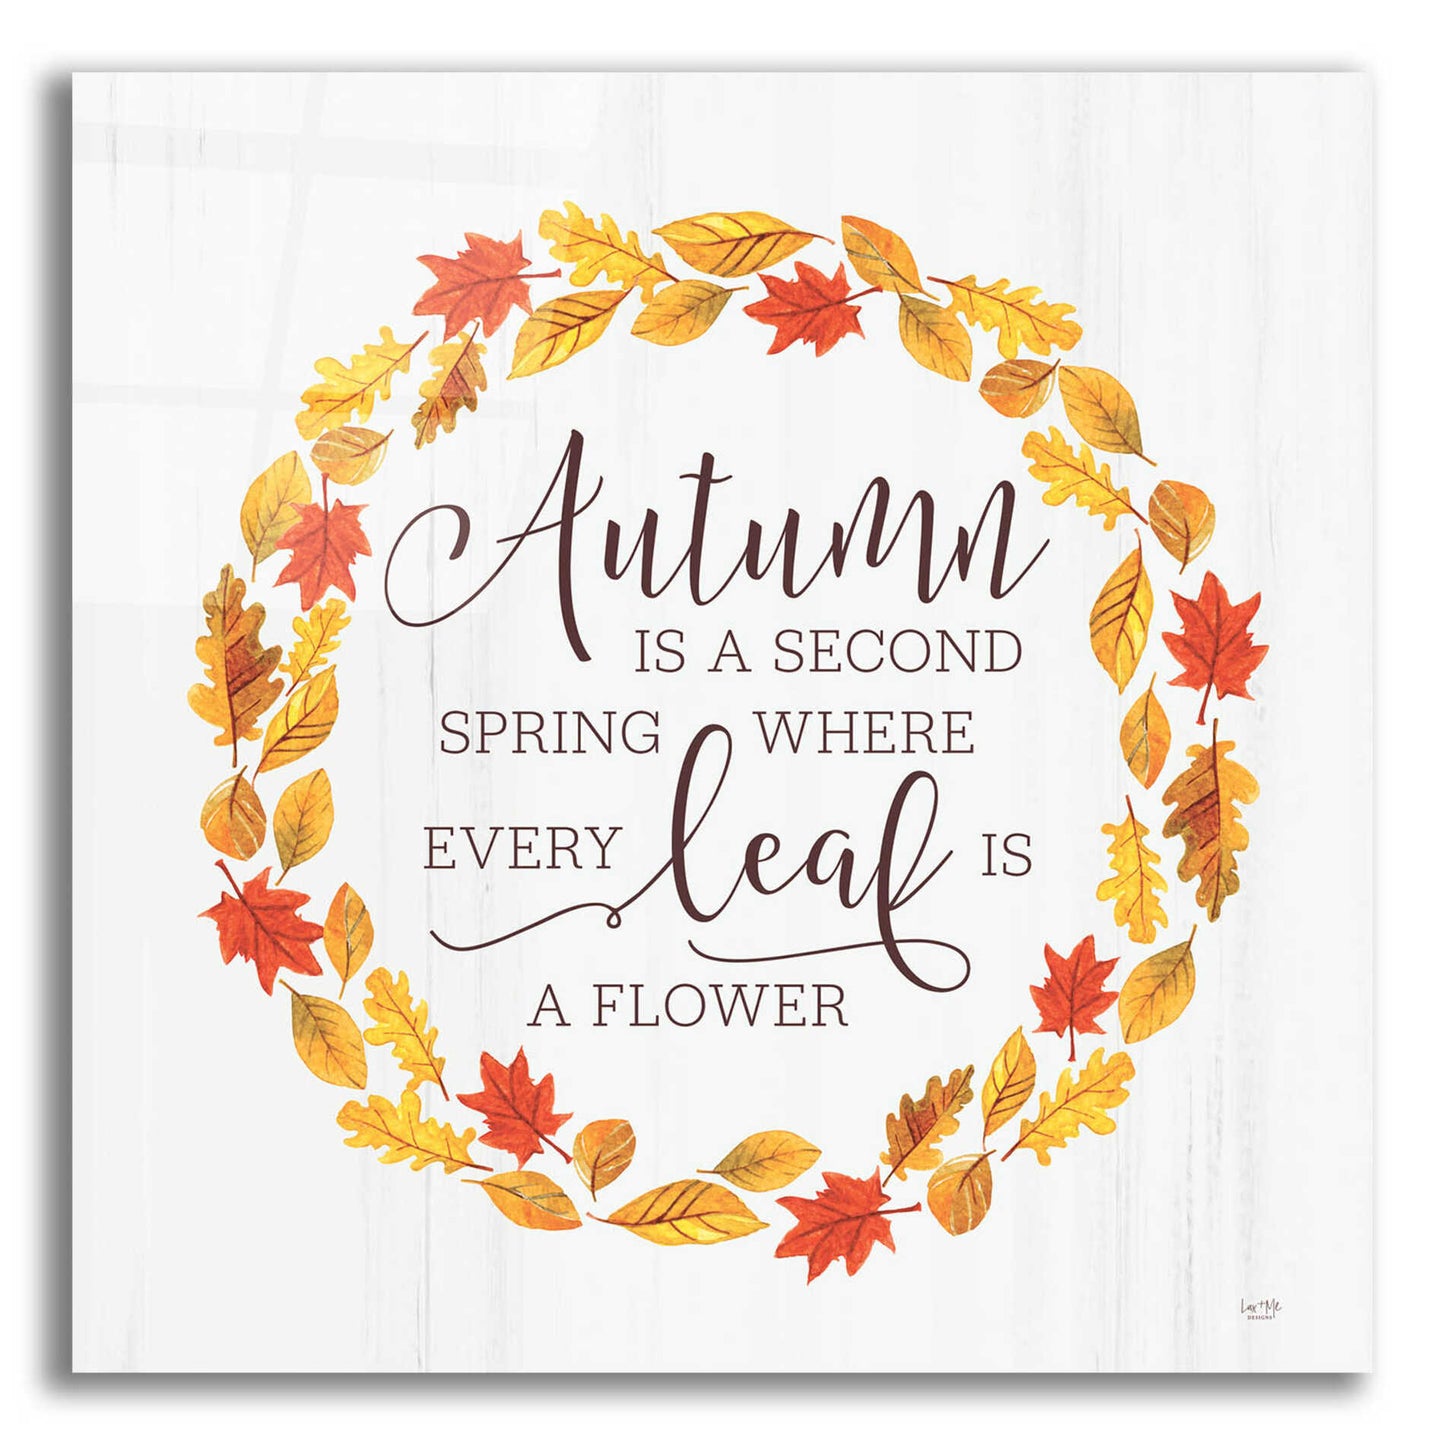 Epic Art 'Autumn is a Second Spring' by Lux + Me Designs, Acrylic Glass Wall Art,12x12